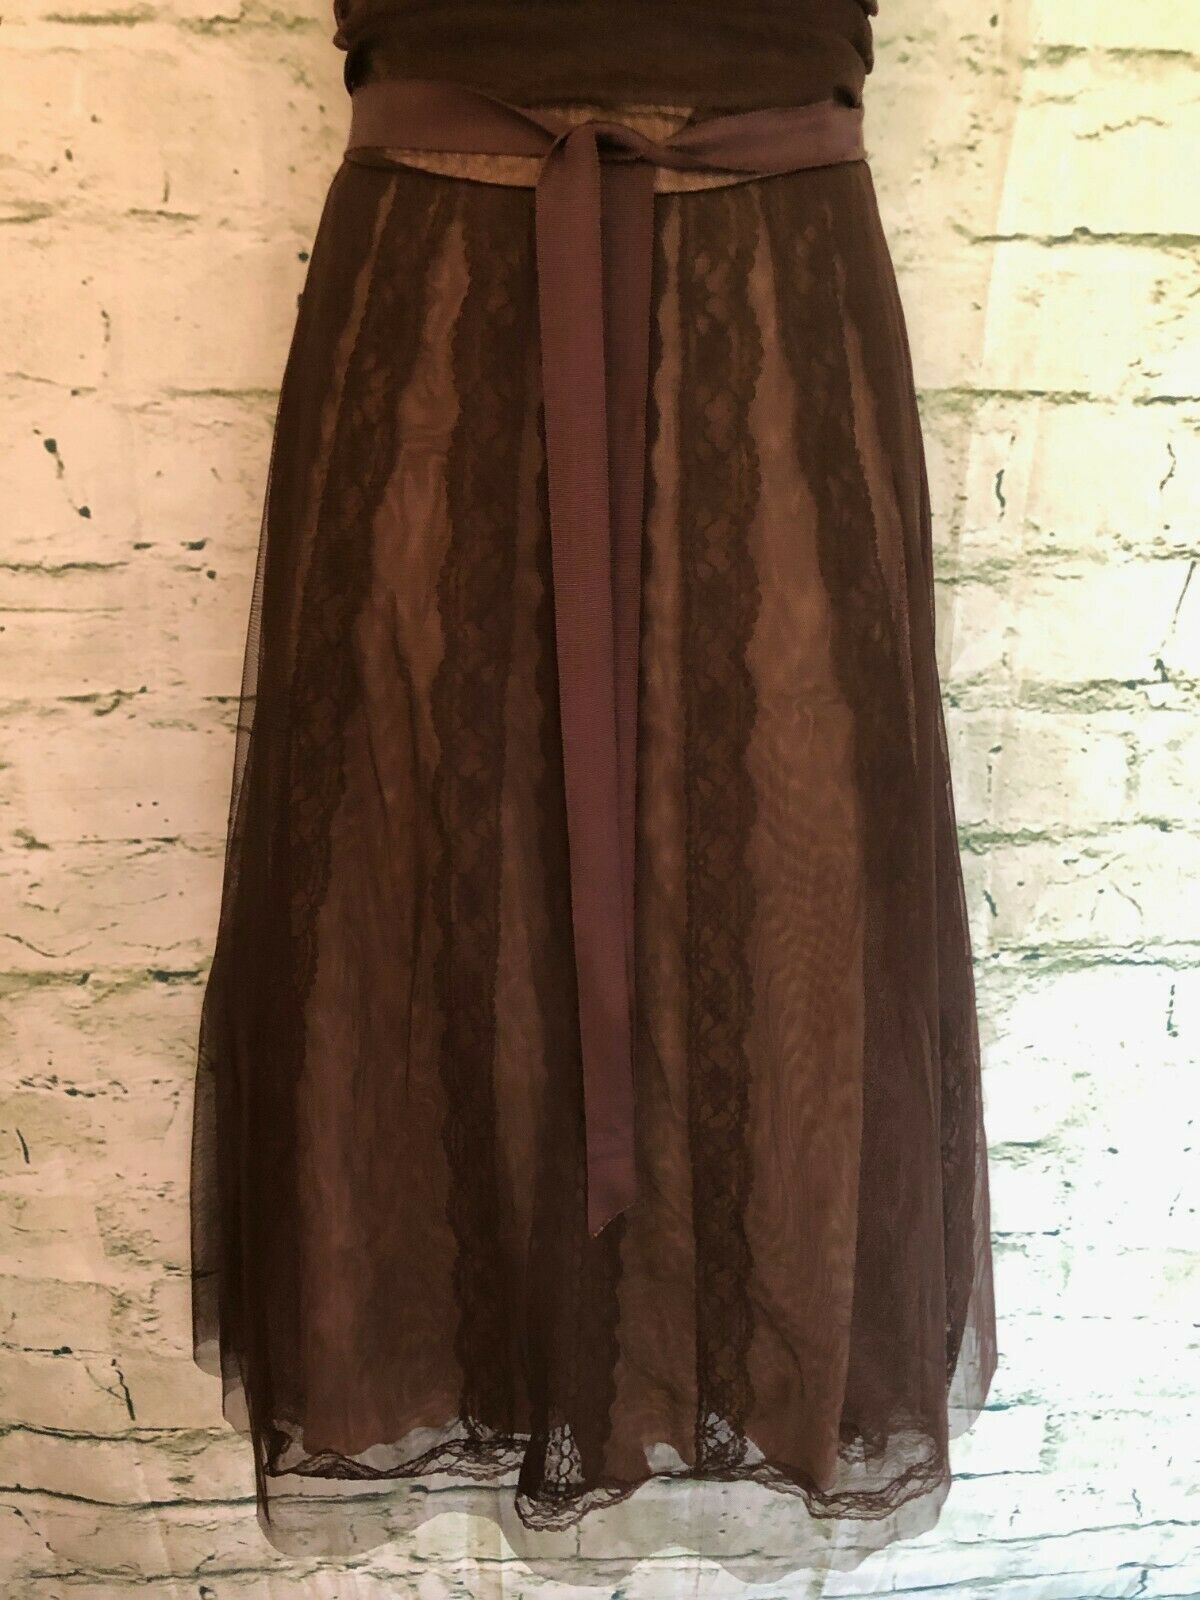 BCBG MAXAZRIA Brown Tulle Fit & Flare Strapless Cocktail Dress UK 10 US 6 EU 38 Timeless Fashions